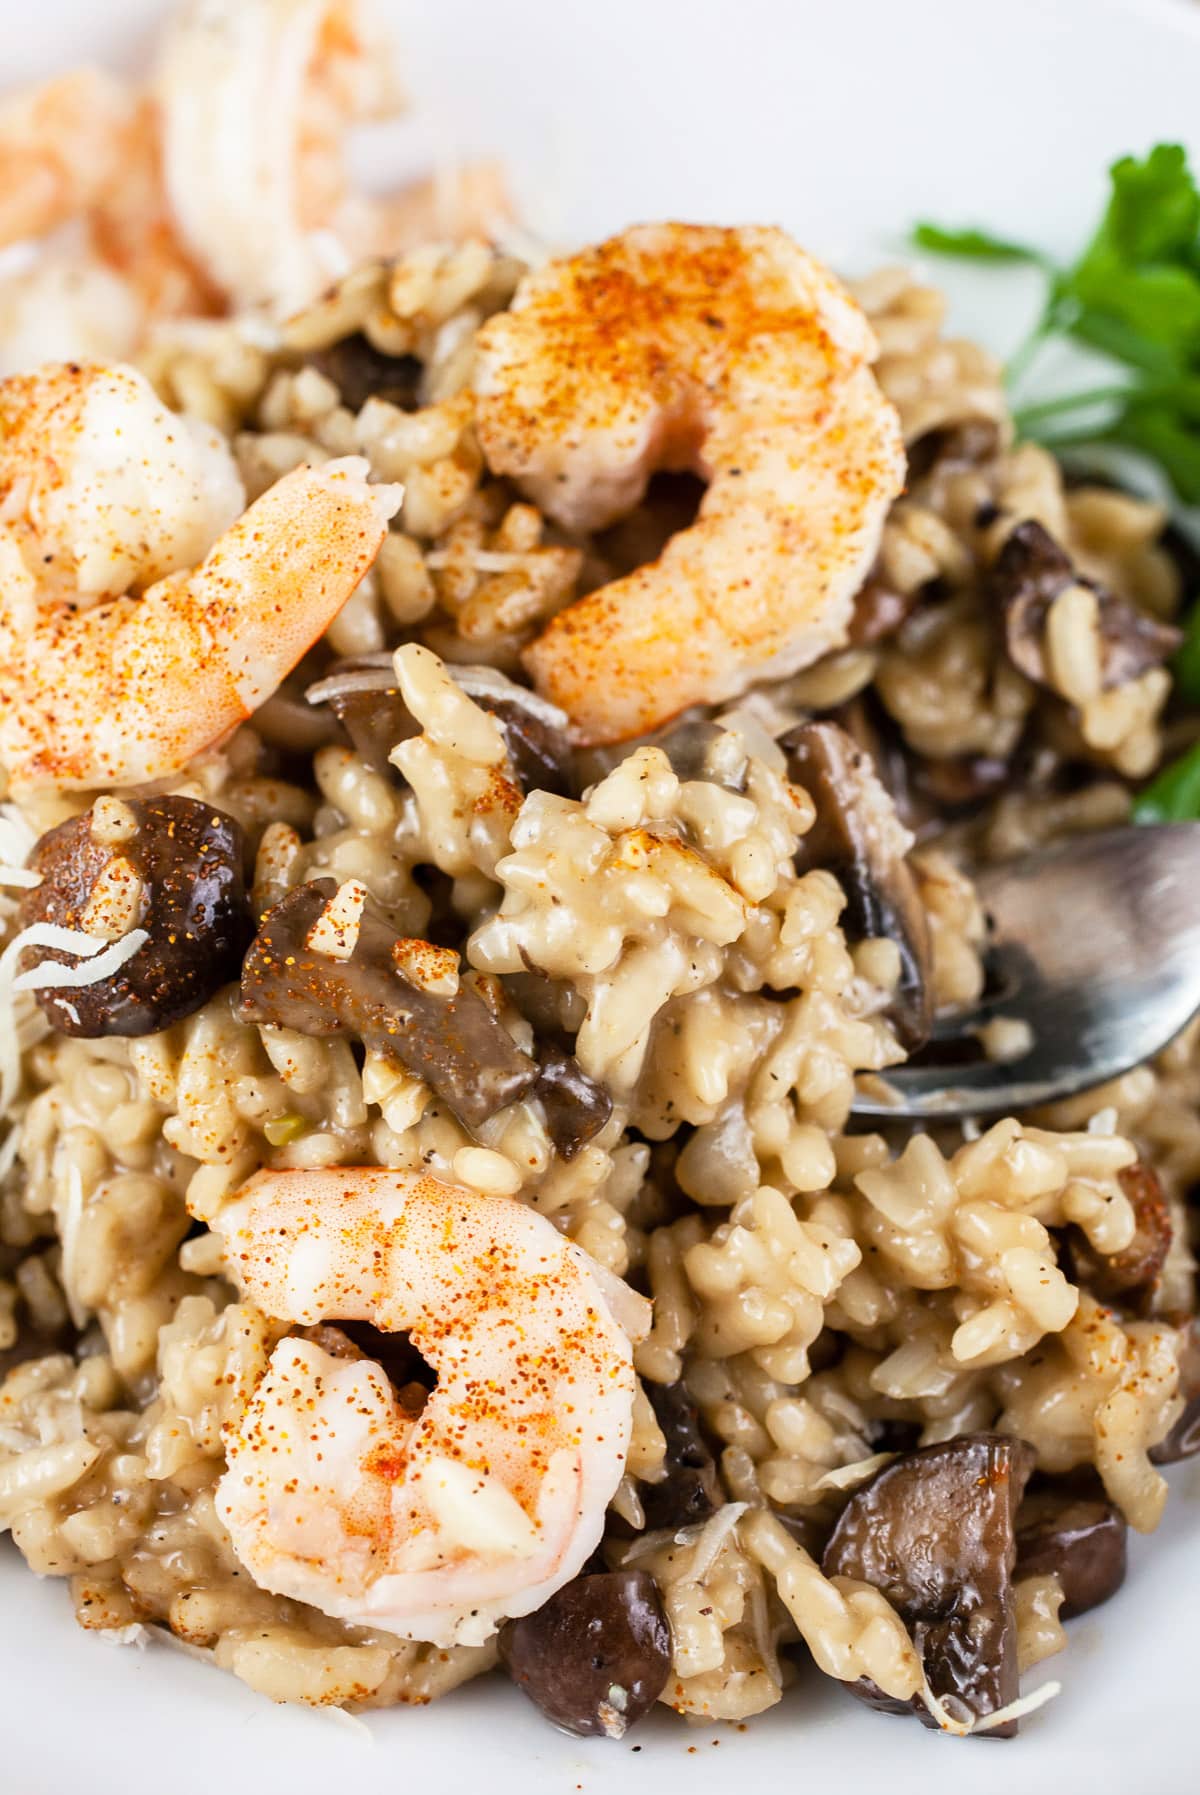 Mushroom shrimp risotto in white bowl with fork.